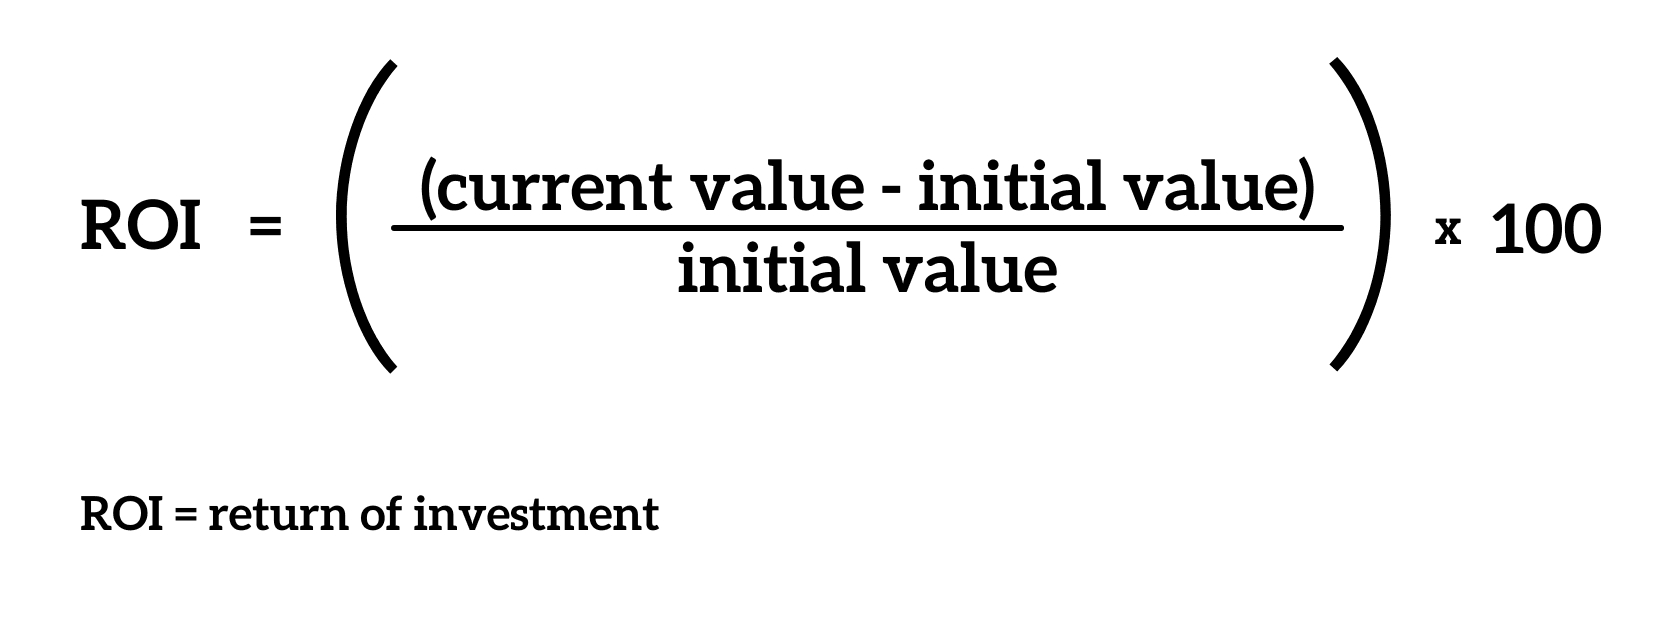 Calculation for determining a return on an investment